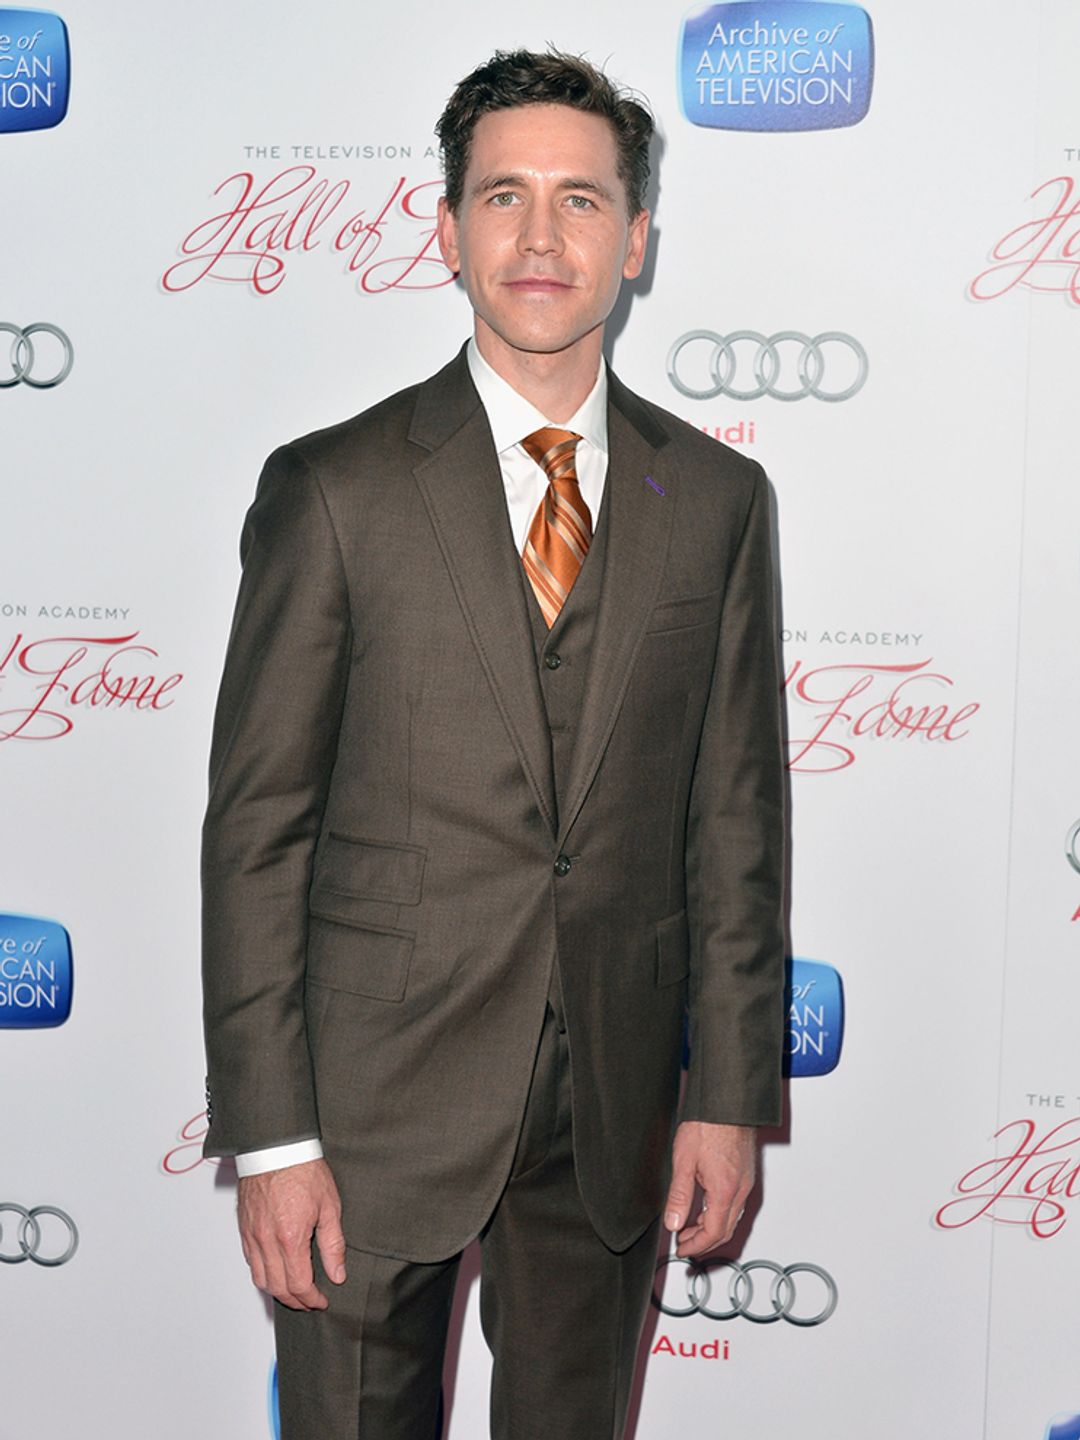 Brian Dietzen attends the Academy of Television Arts & Sciences' 22nd Annual Hall of Fame Induction Gala at The Beverly Hilton Hotel 